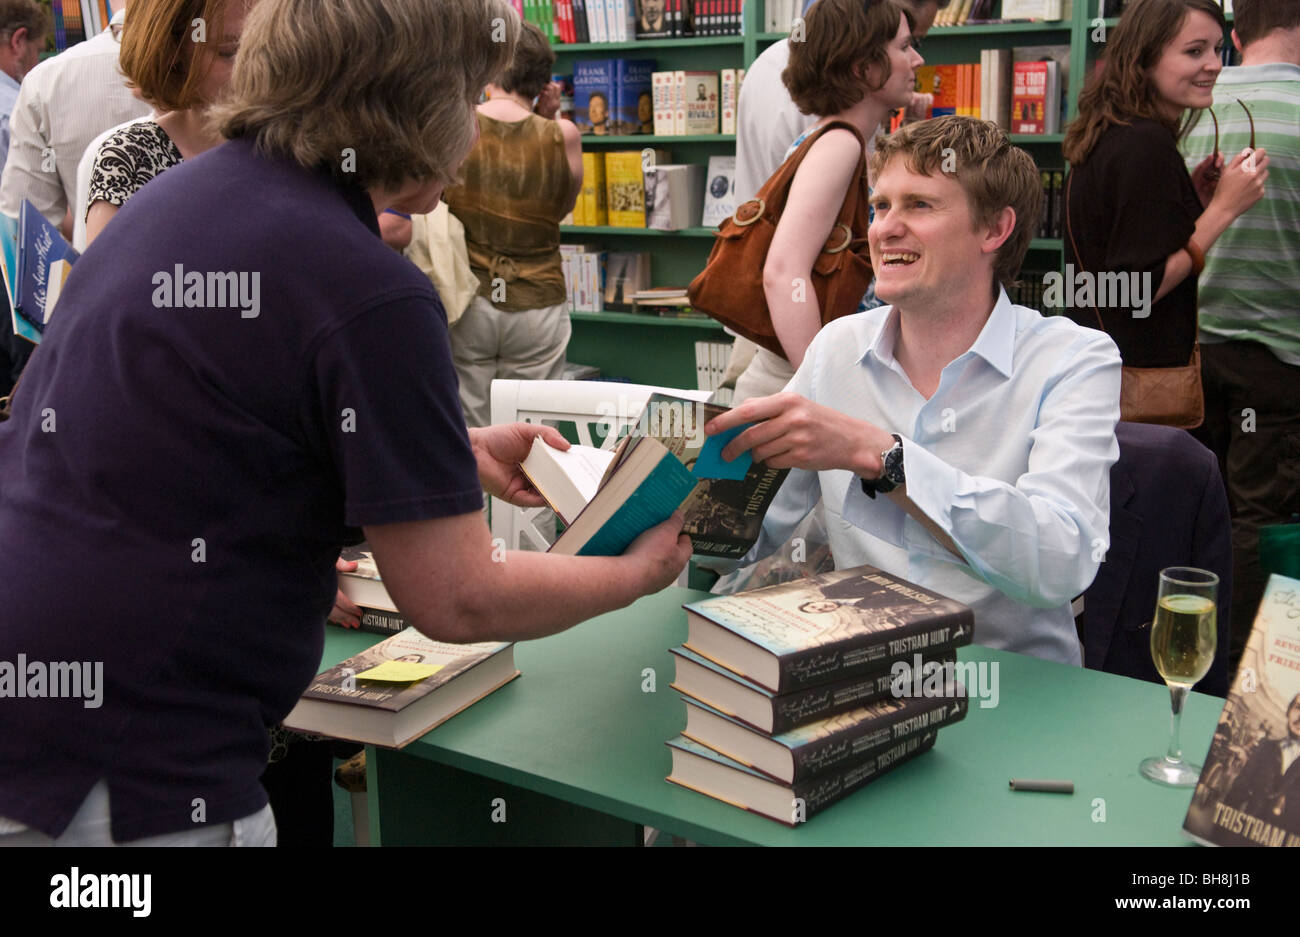 British historian Tristram Hunt pictured book signing at Hay Festival 2009. Stock Photo